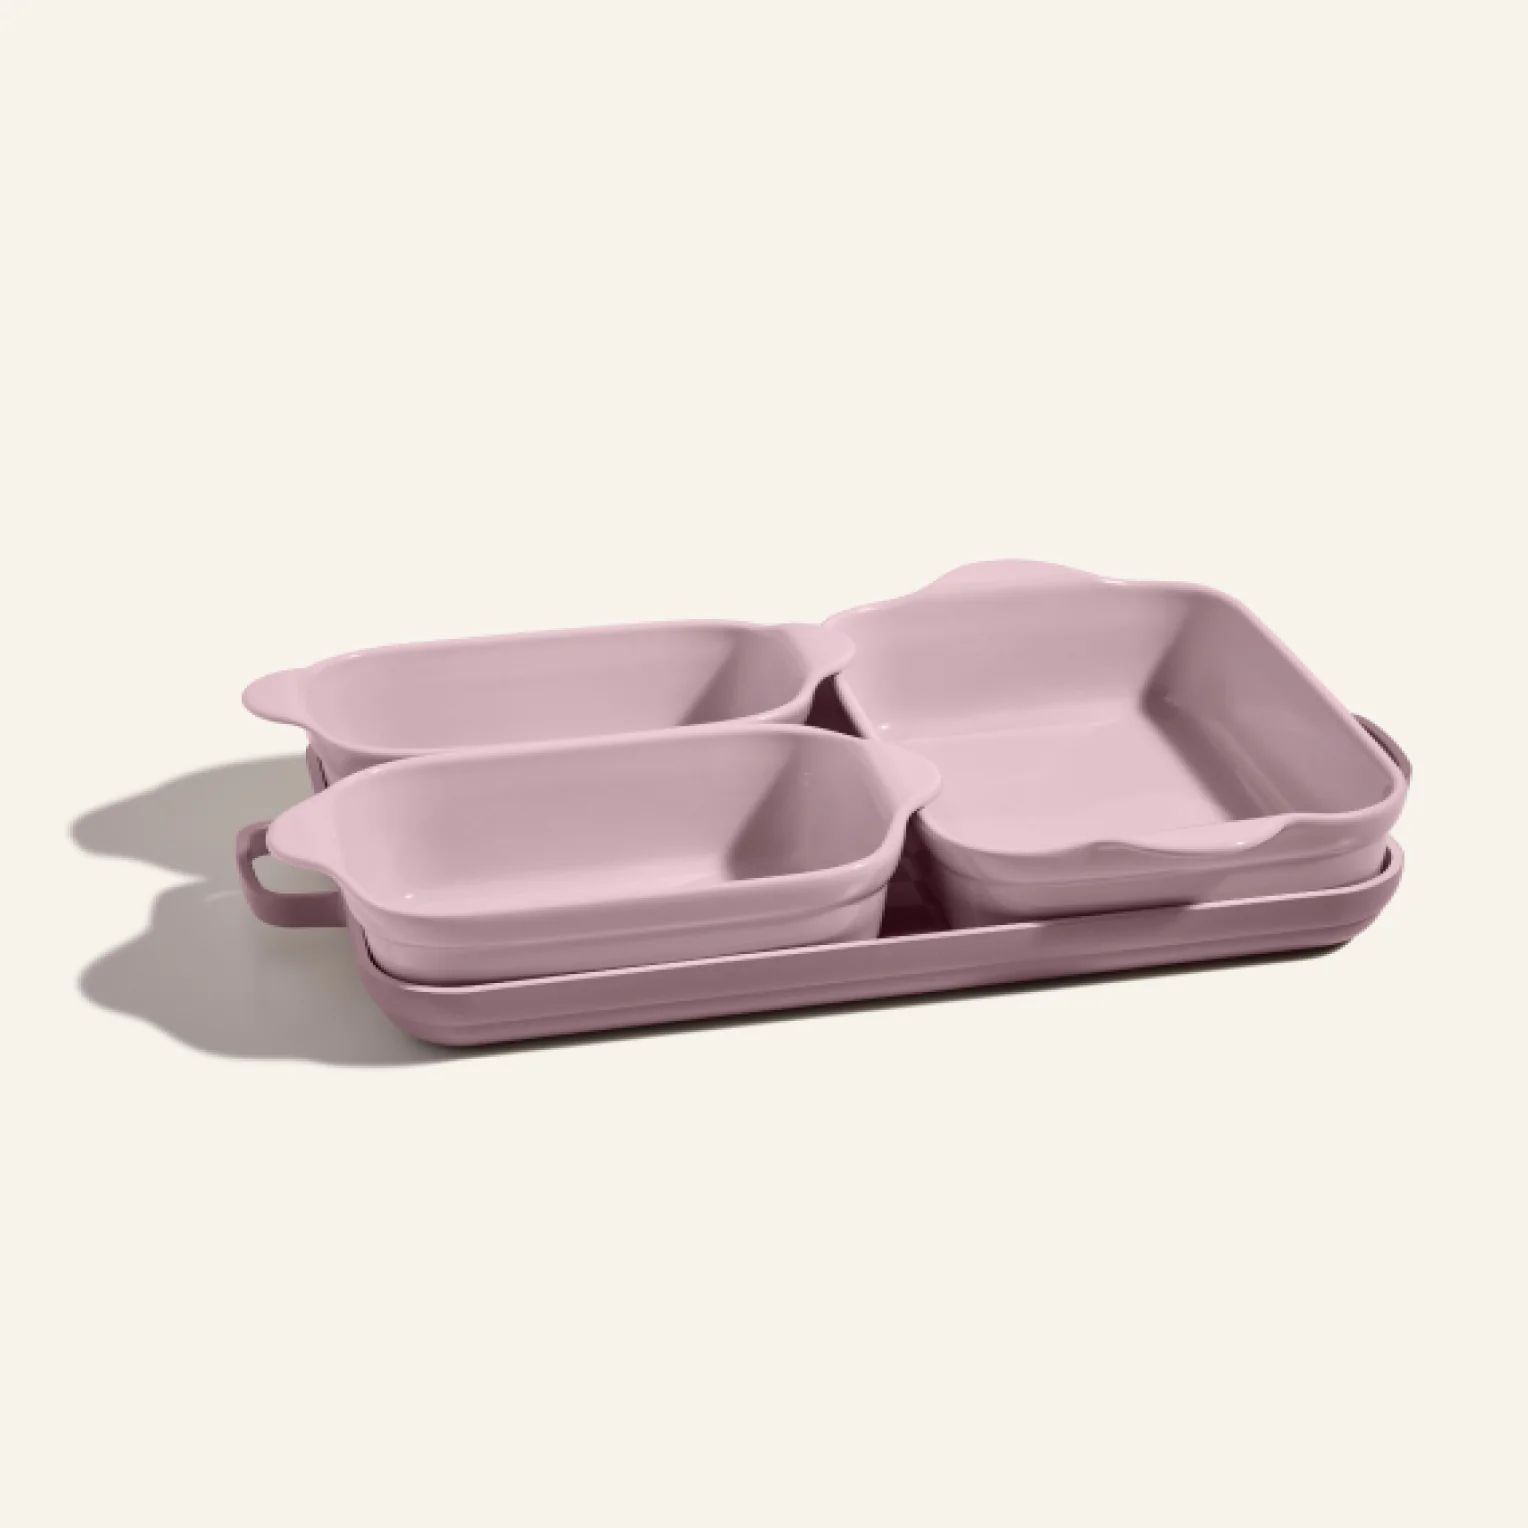 Ovenware Set | Our Place